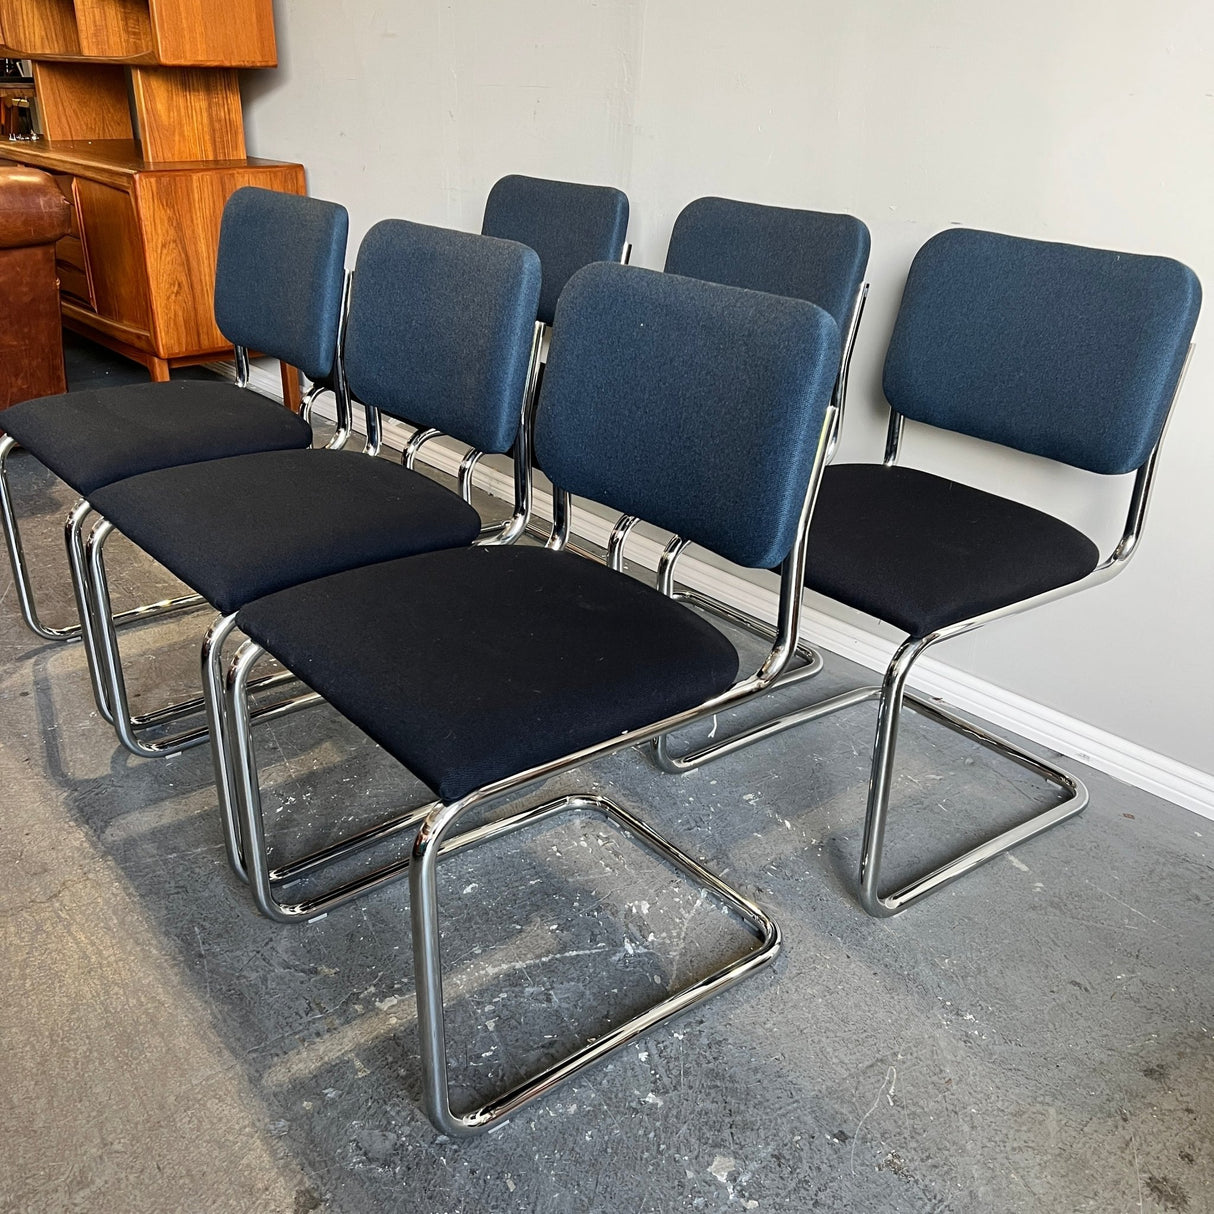 New! Authentic Knoll Marcel Breuer set of 6 Cesca chairs - enliven mart